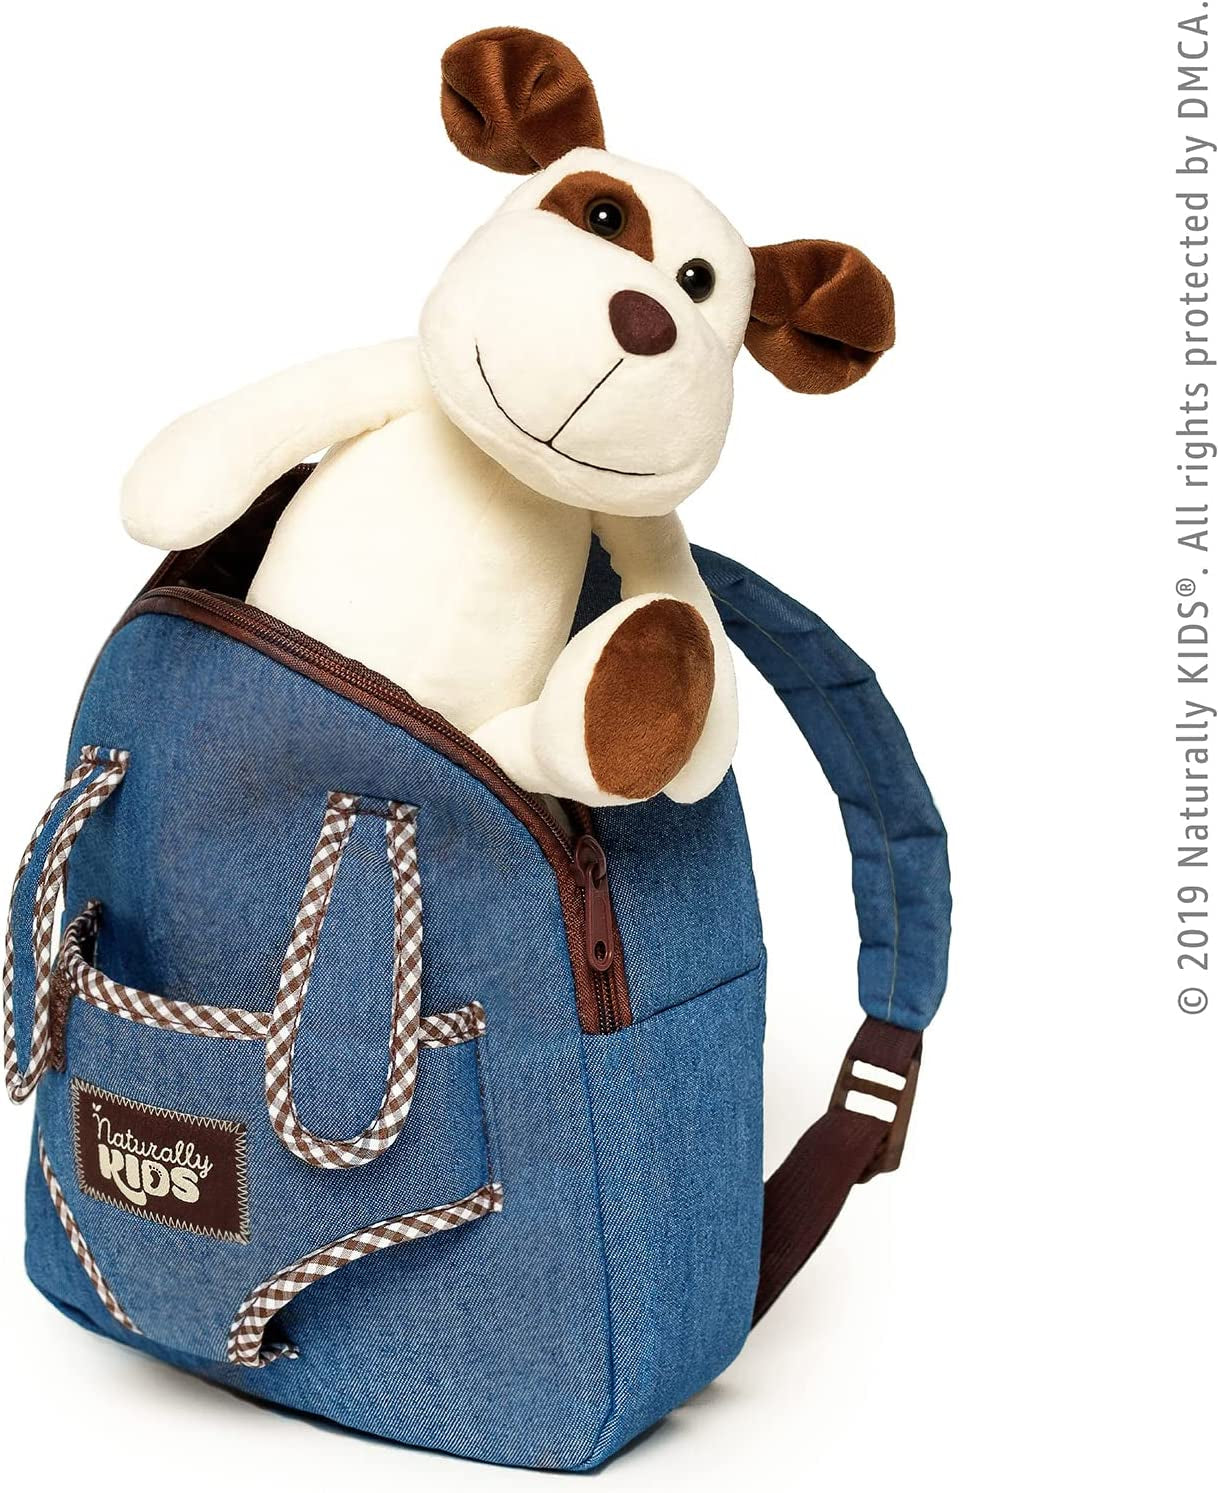 Naturally KIDS Dog Toddler Backpack, Dog Stuffed Animals, Stuffed Dog for Toddlers Boys Girls